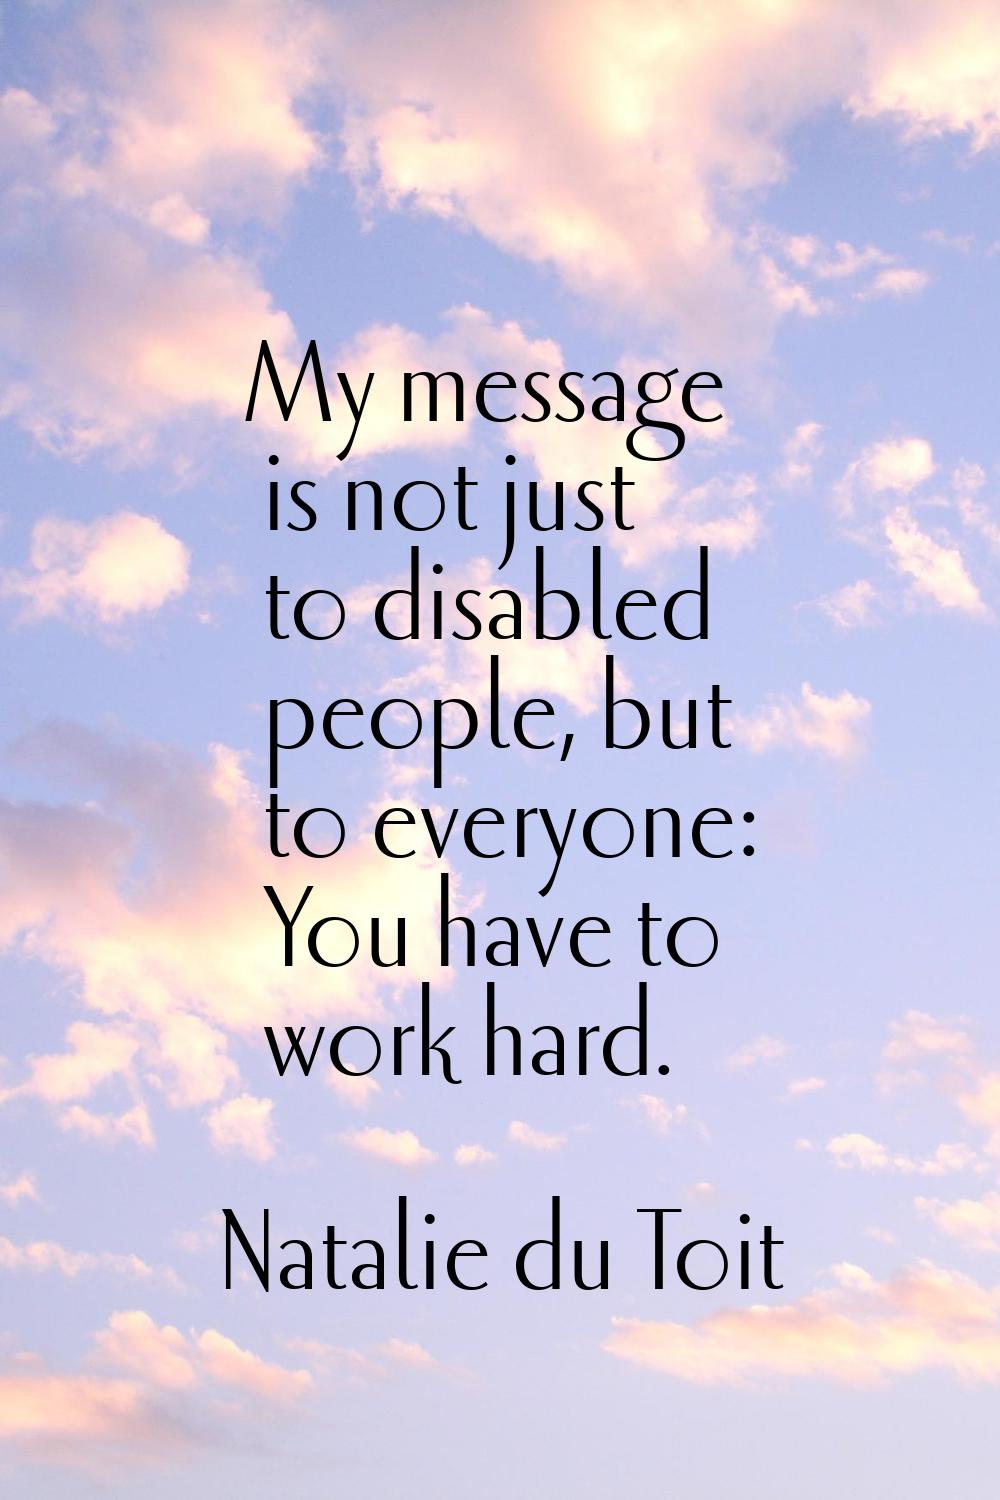 My message is not just to disabled people, but to everyone: You have to work hard.